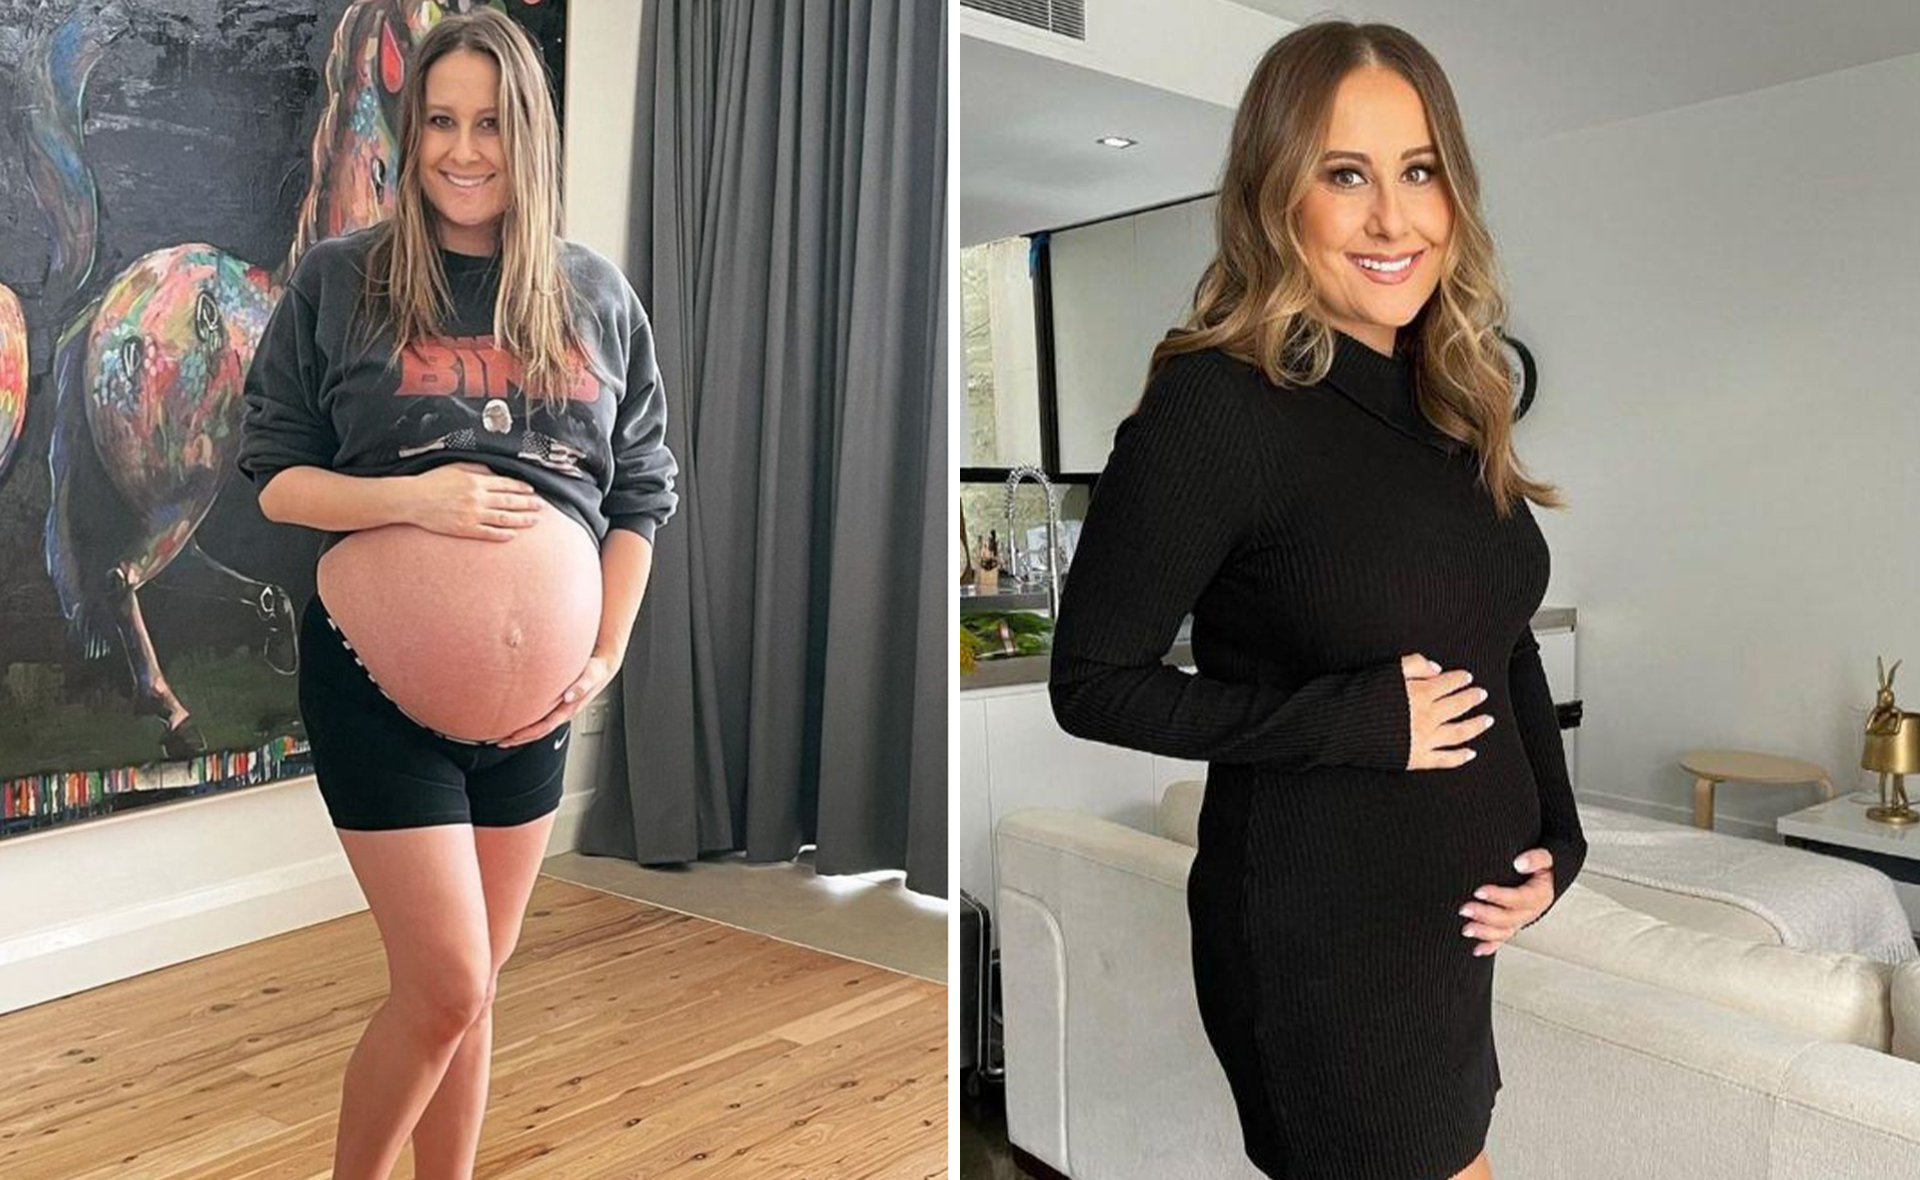 Real Housewives of Melbourne star Jackie Gillies shares the details of her twins’ birth and admits she was “freaking out” over motherhood